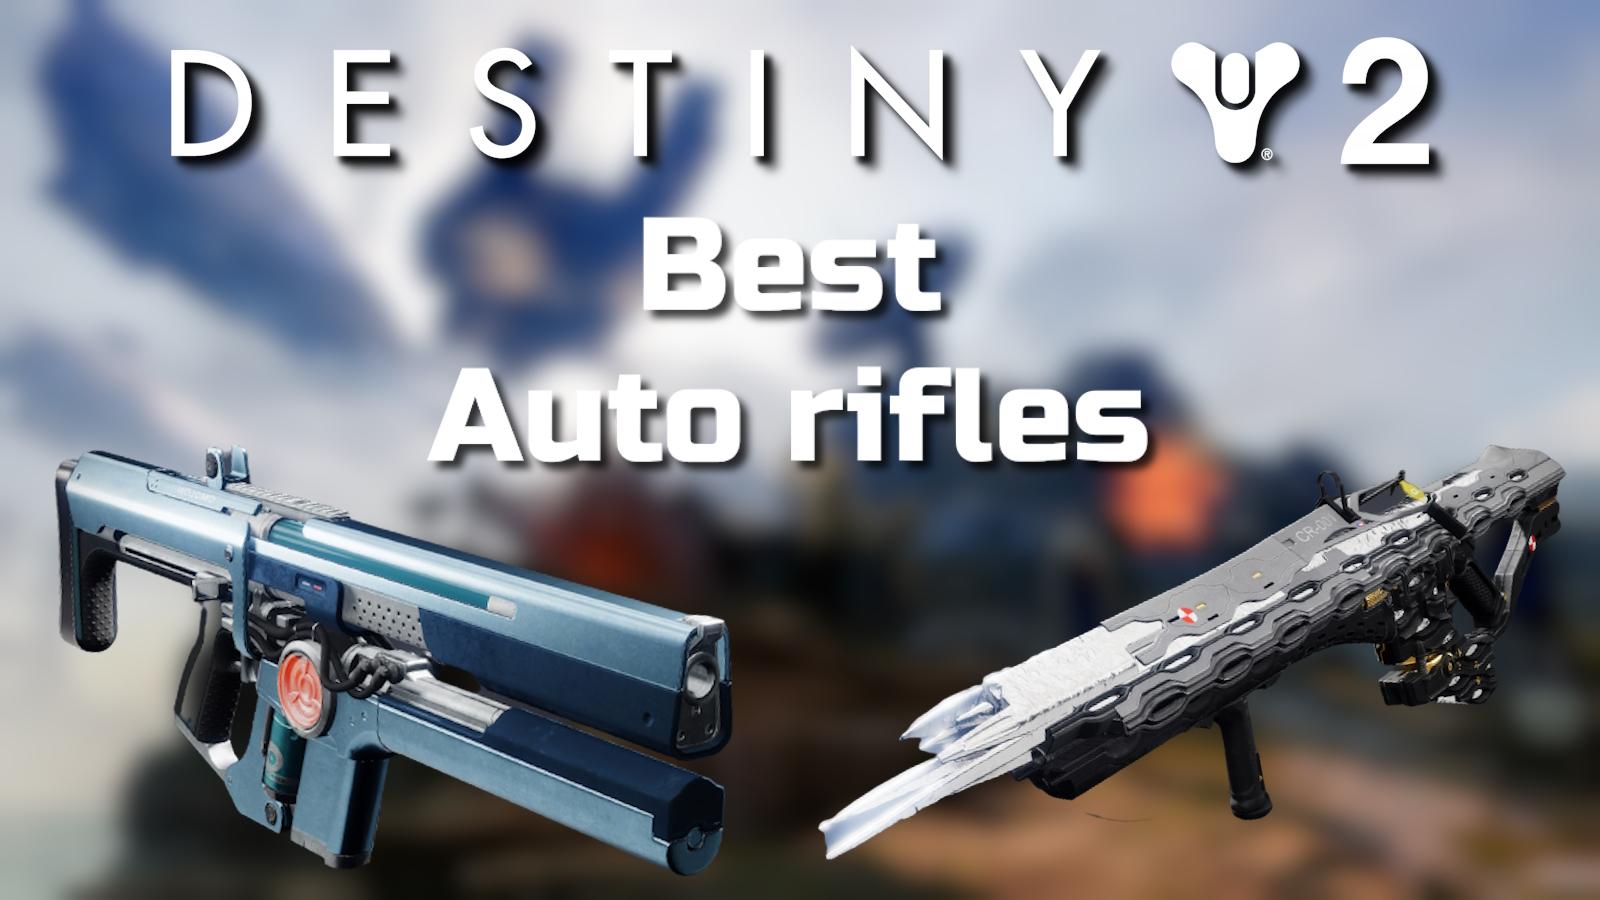 Best Auto Rifles in Destiny 2 for PvE and PvP with Quicksilver Storm Exotic and Ammit AR2 Legendary.